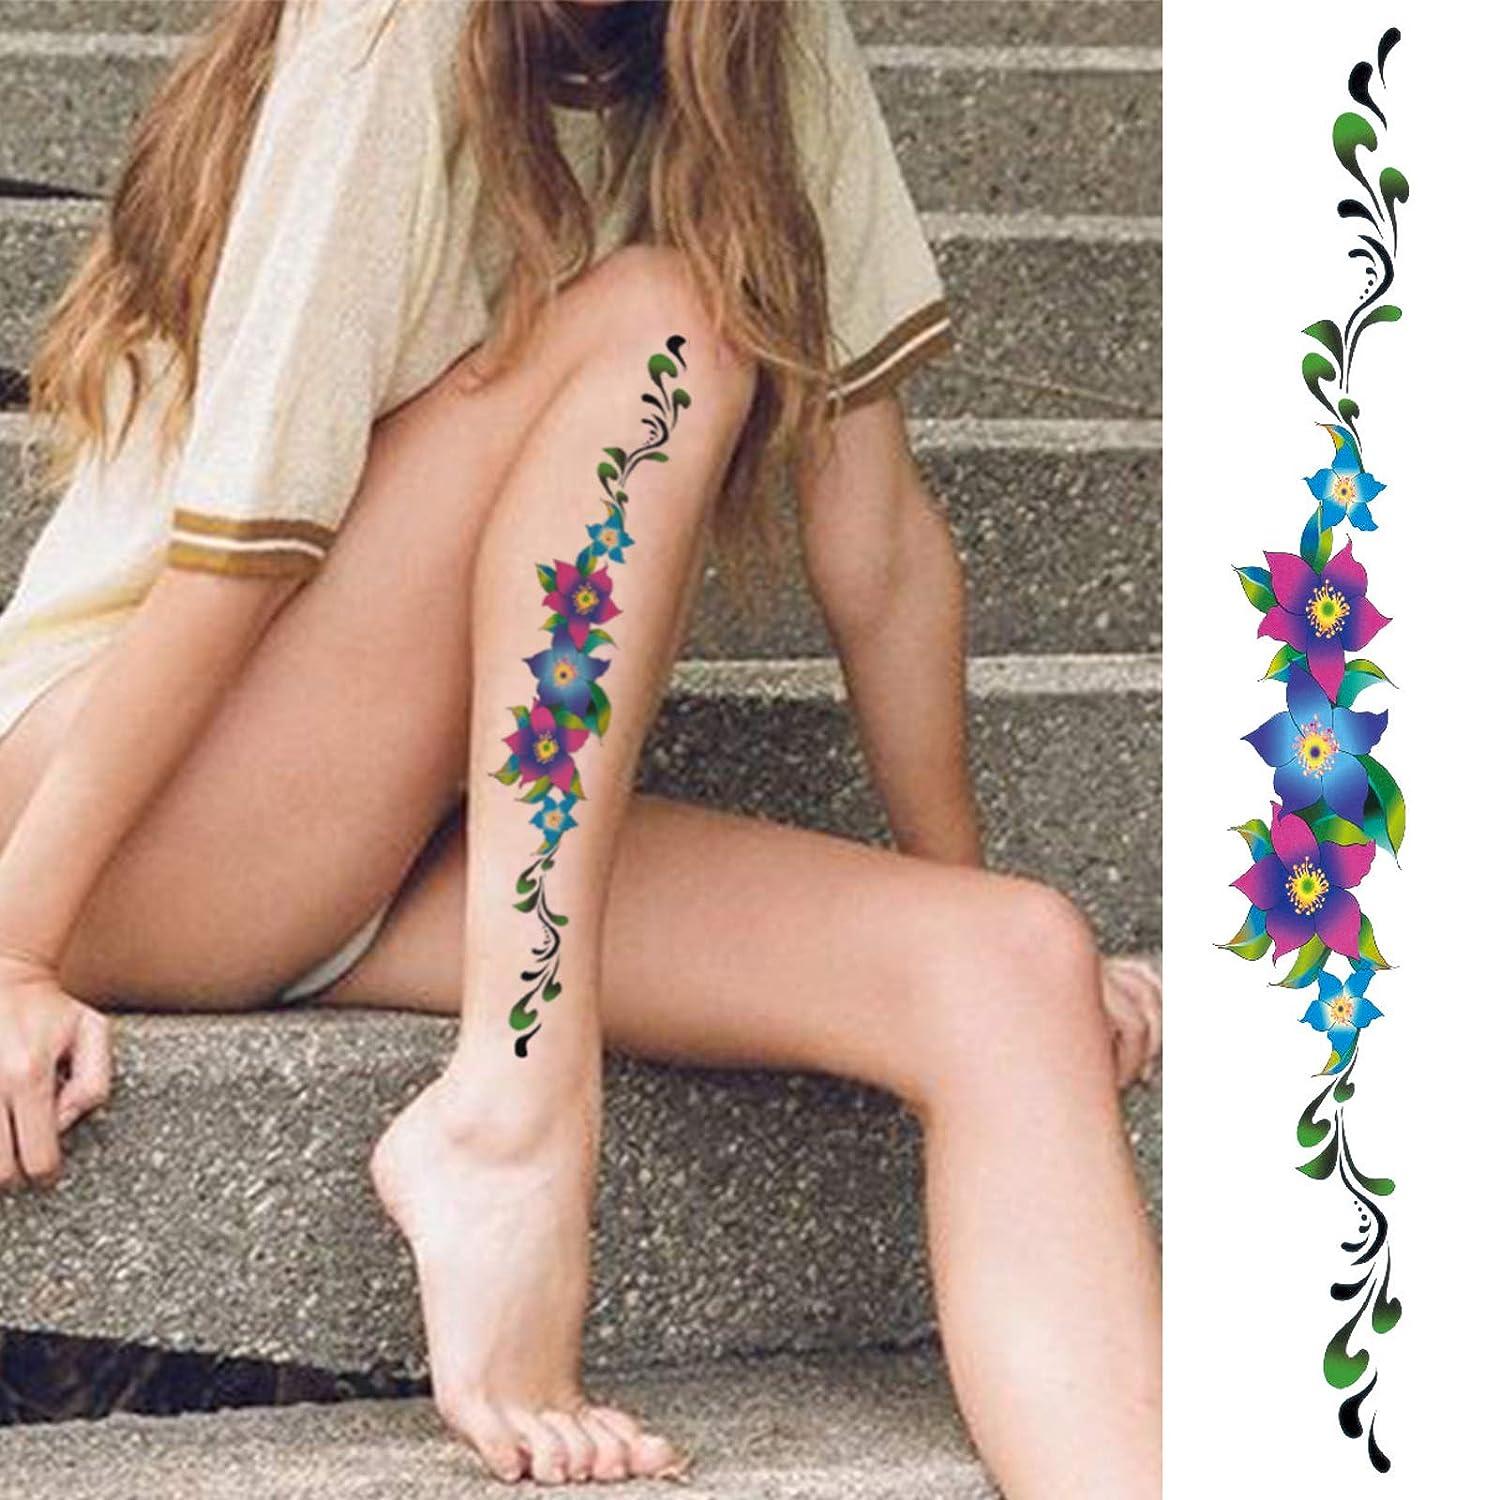 Fine line flower tattoo on the ankle.